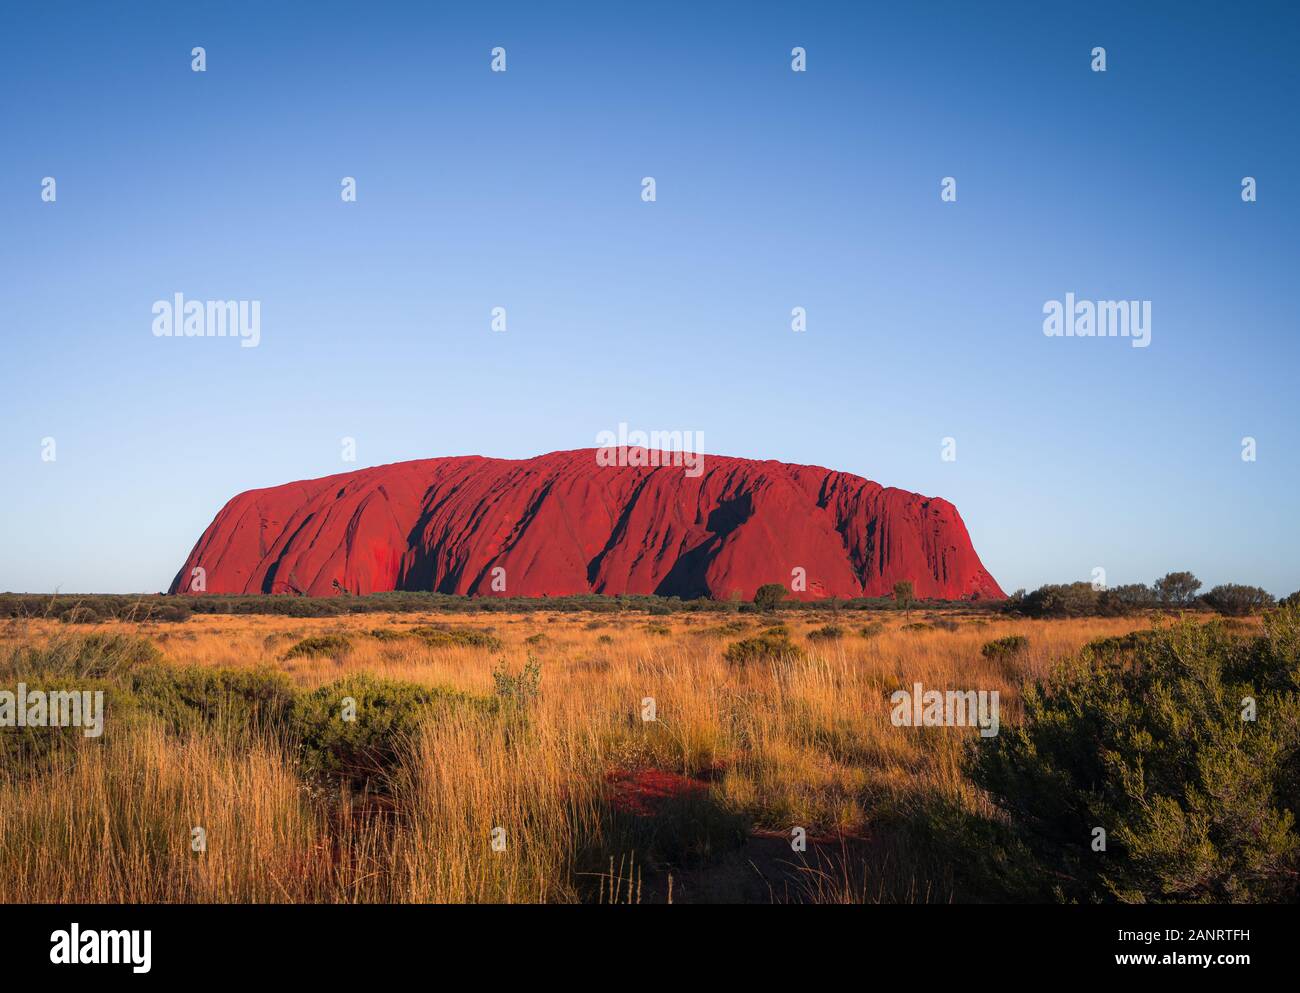 Outback landscape, Central Australia, Northern Territory Stock Photo